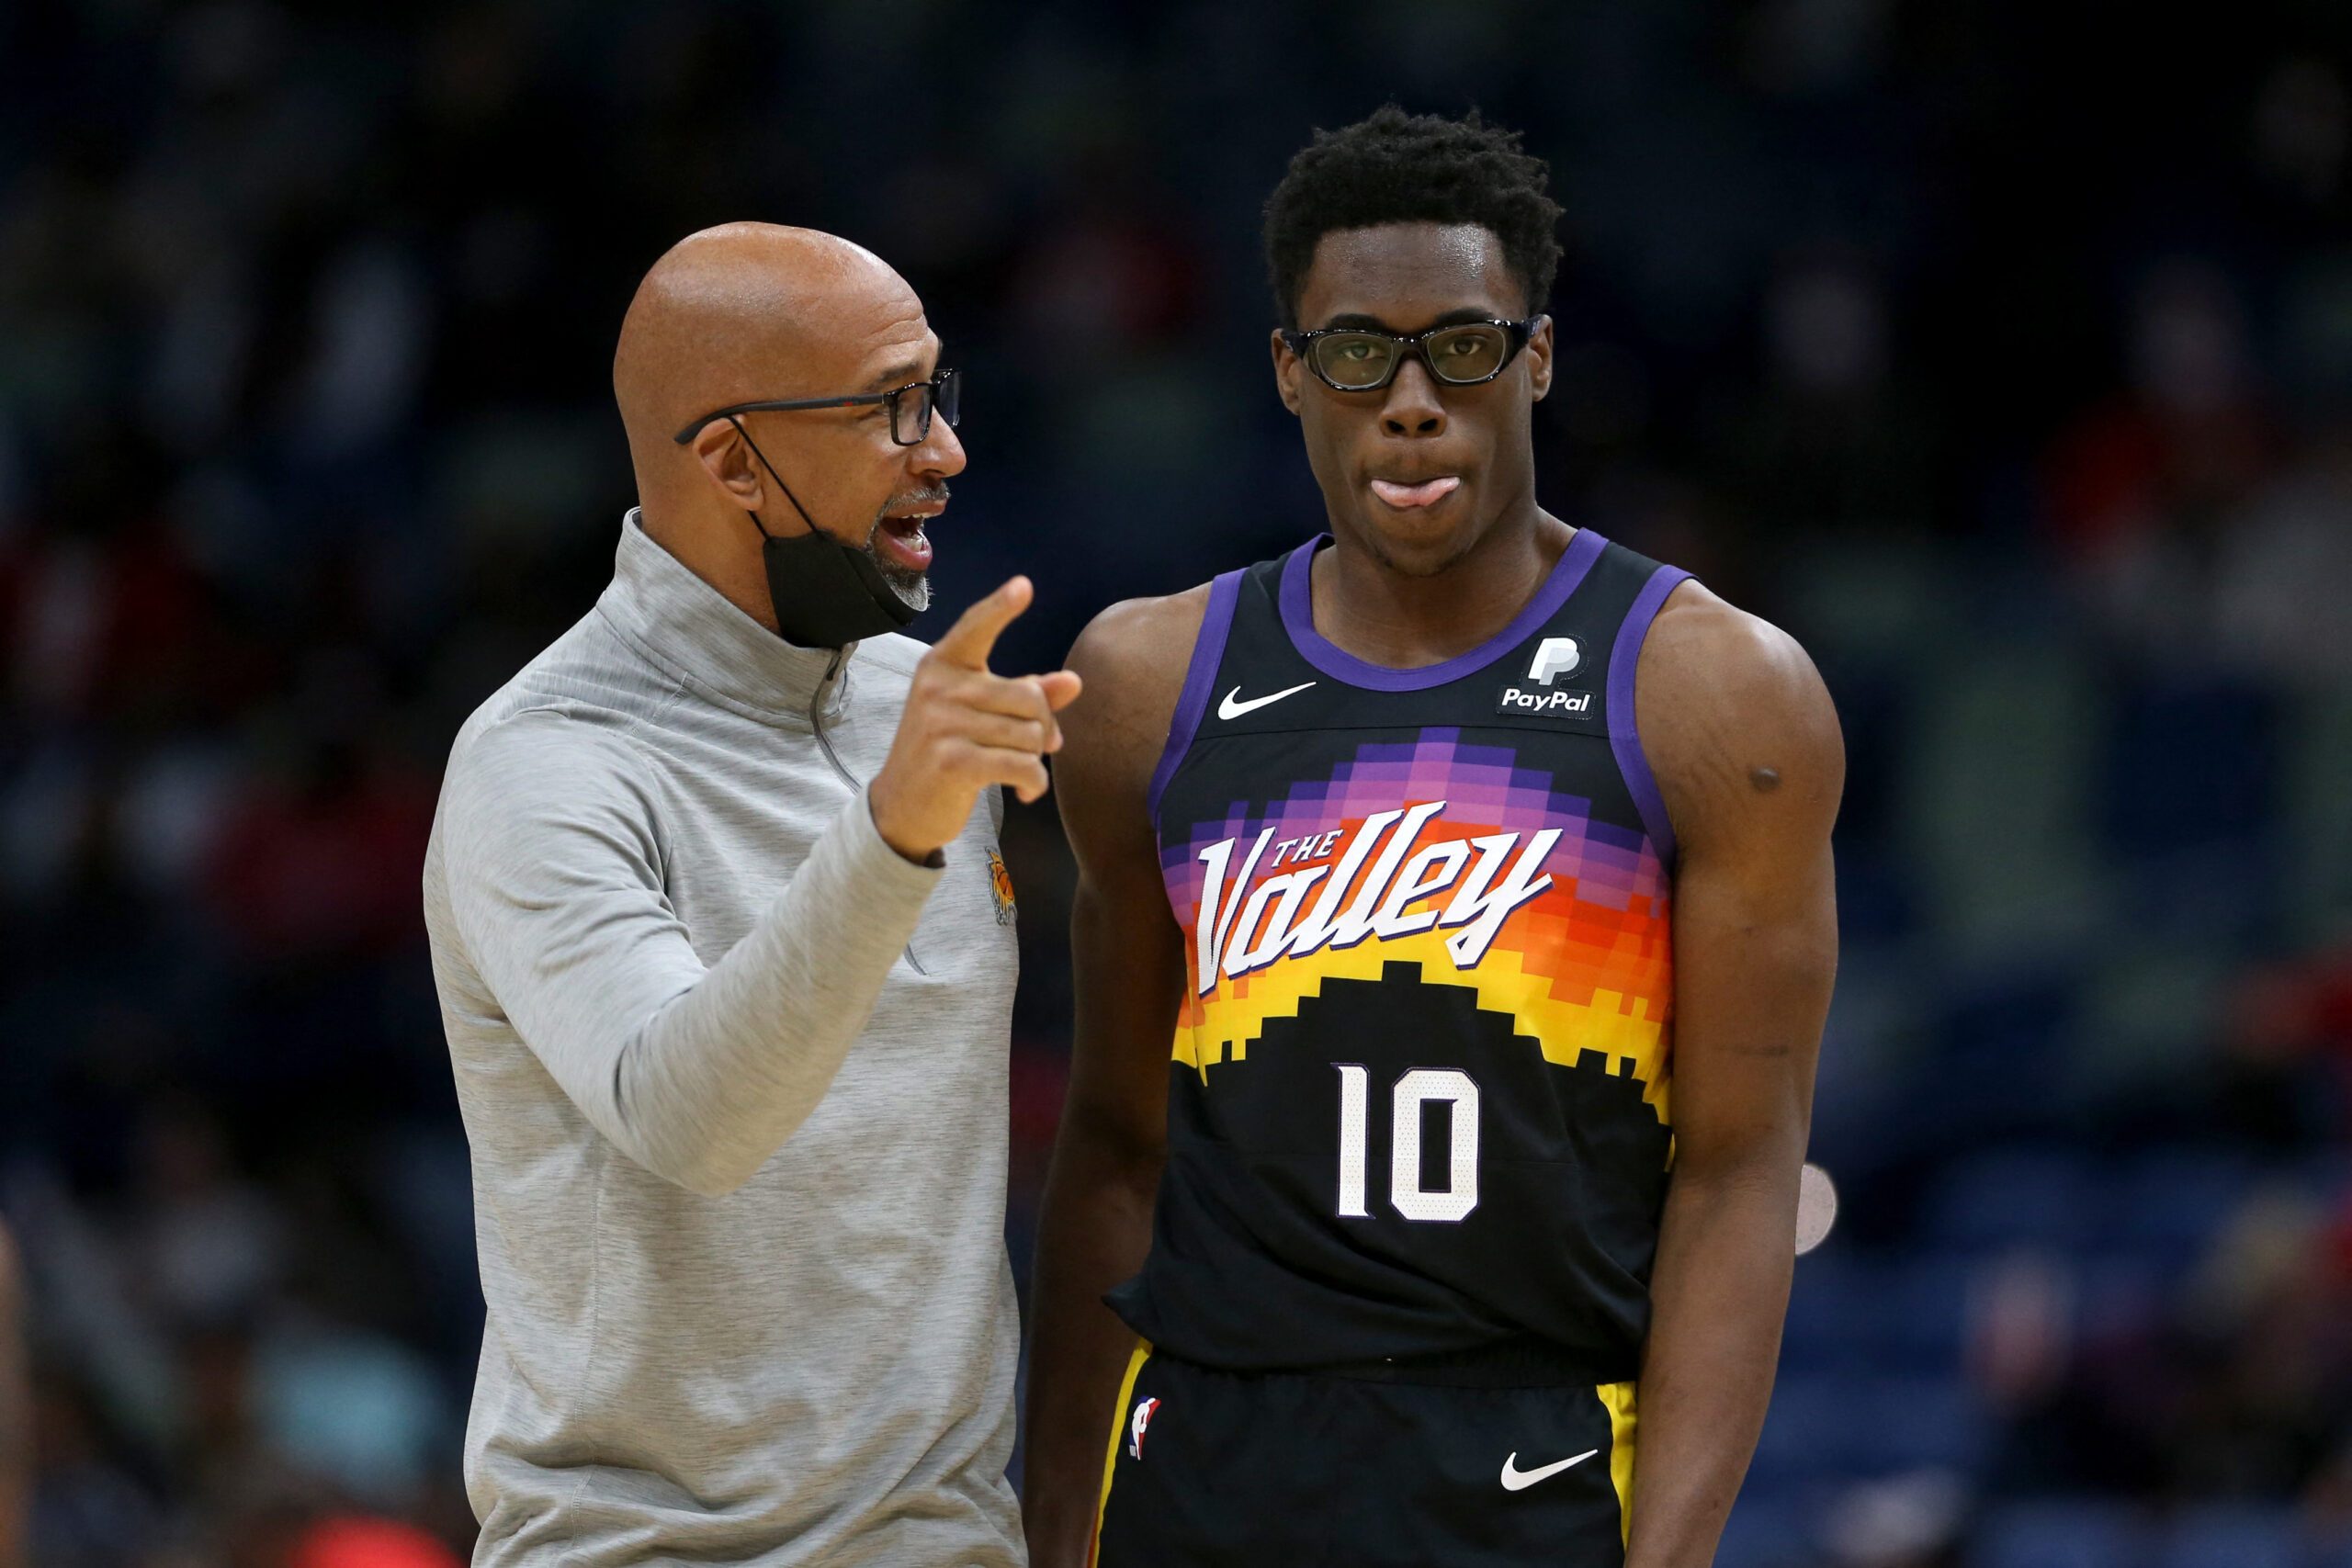 Suns’ Monty Williams to coach Team LeBron in All-Star Game